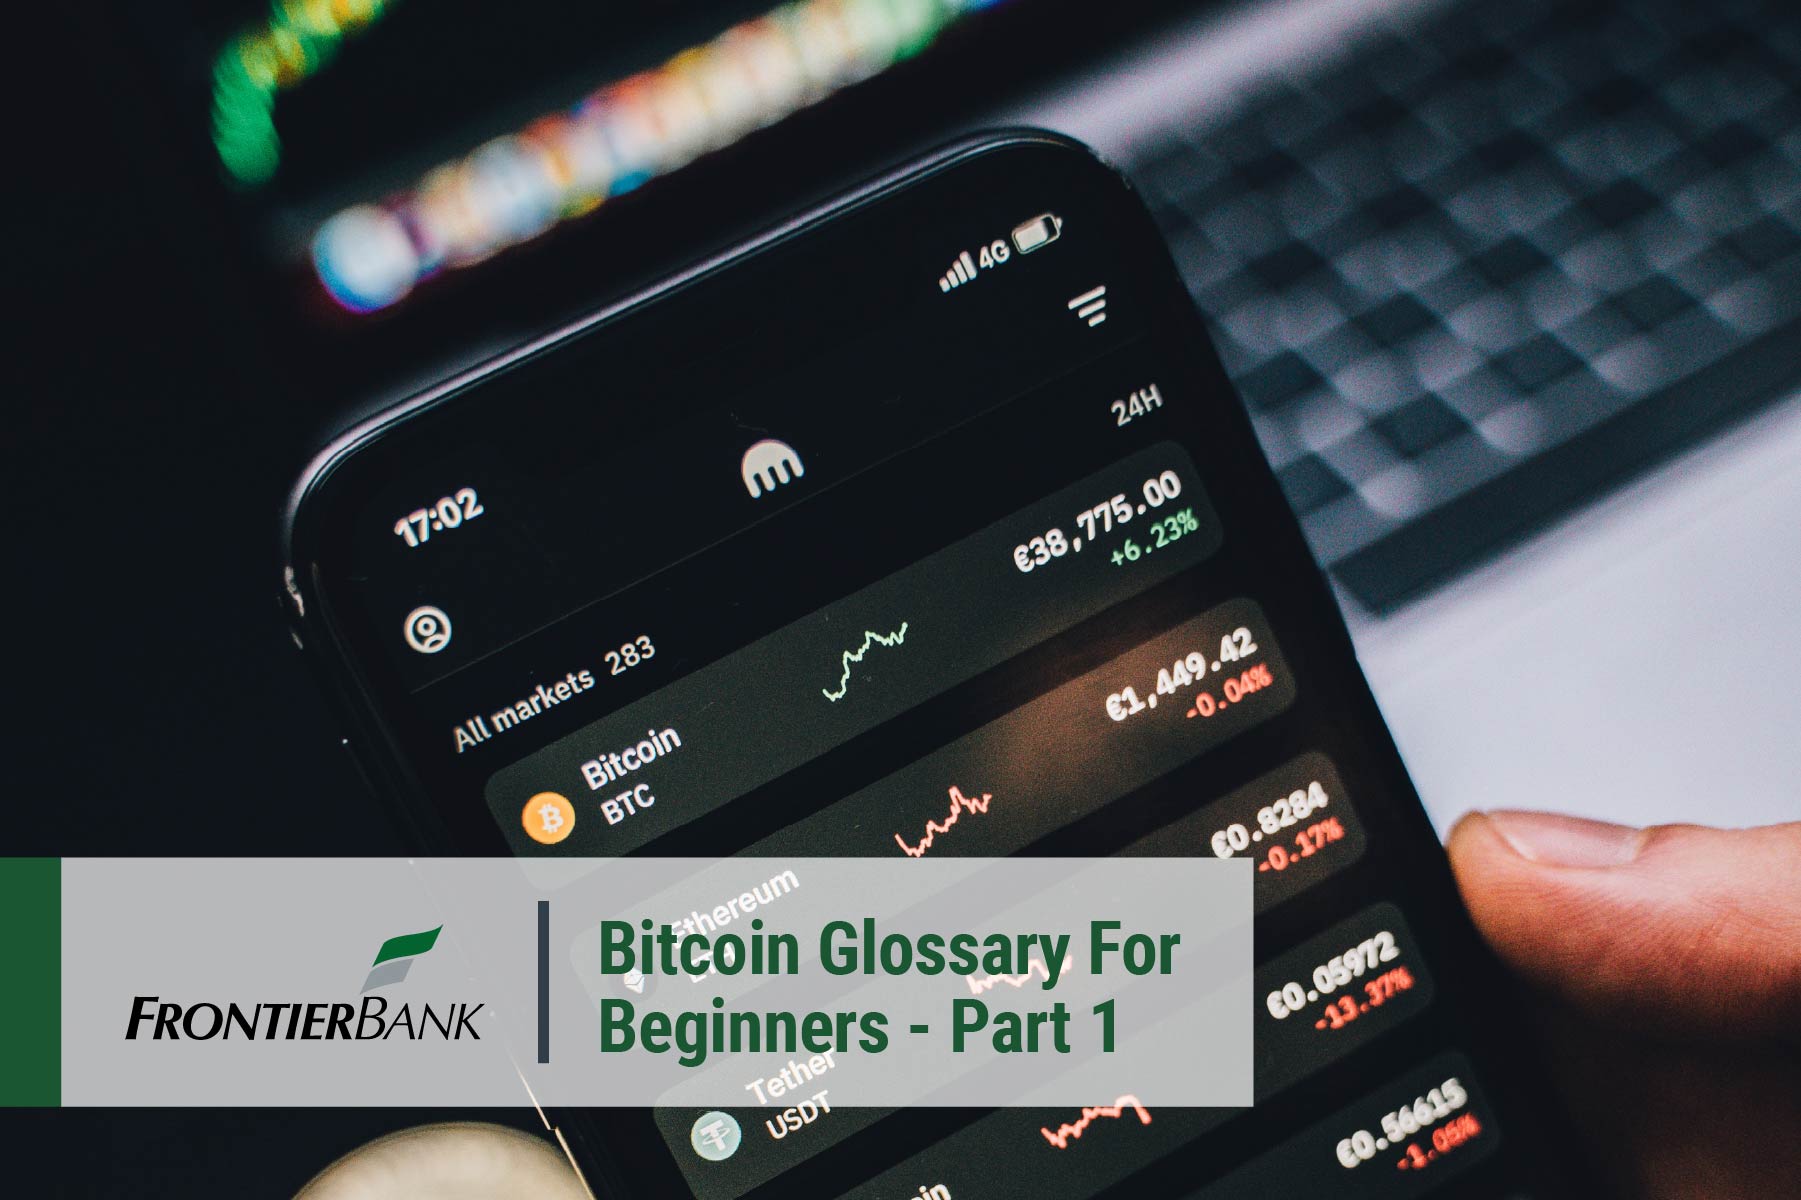 Bitcoin Glossary For Beginners with text